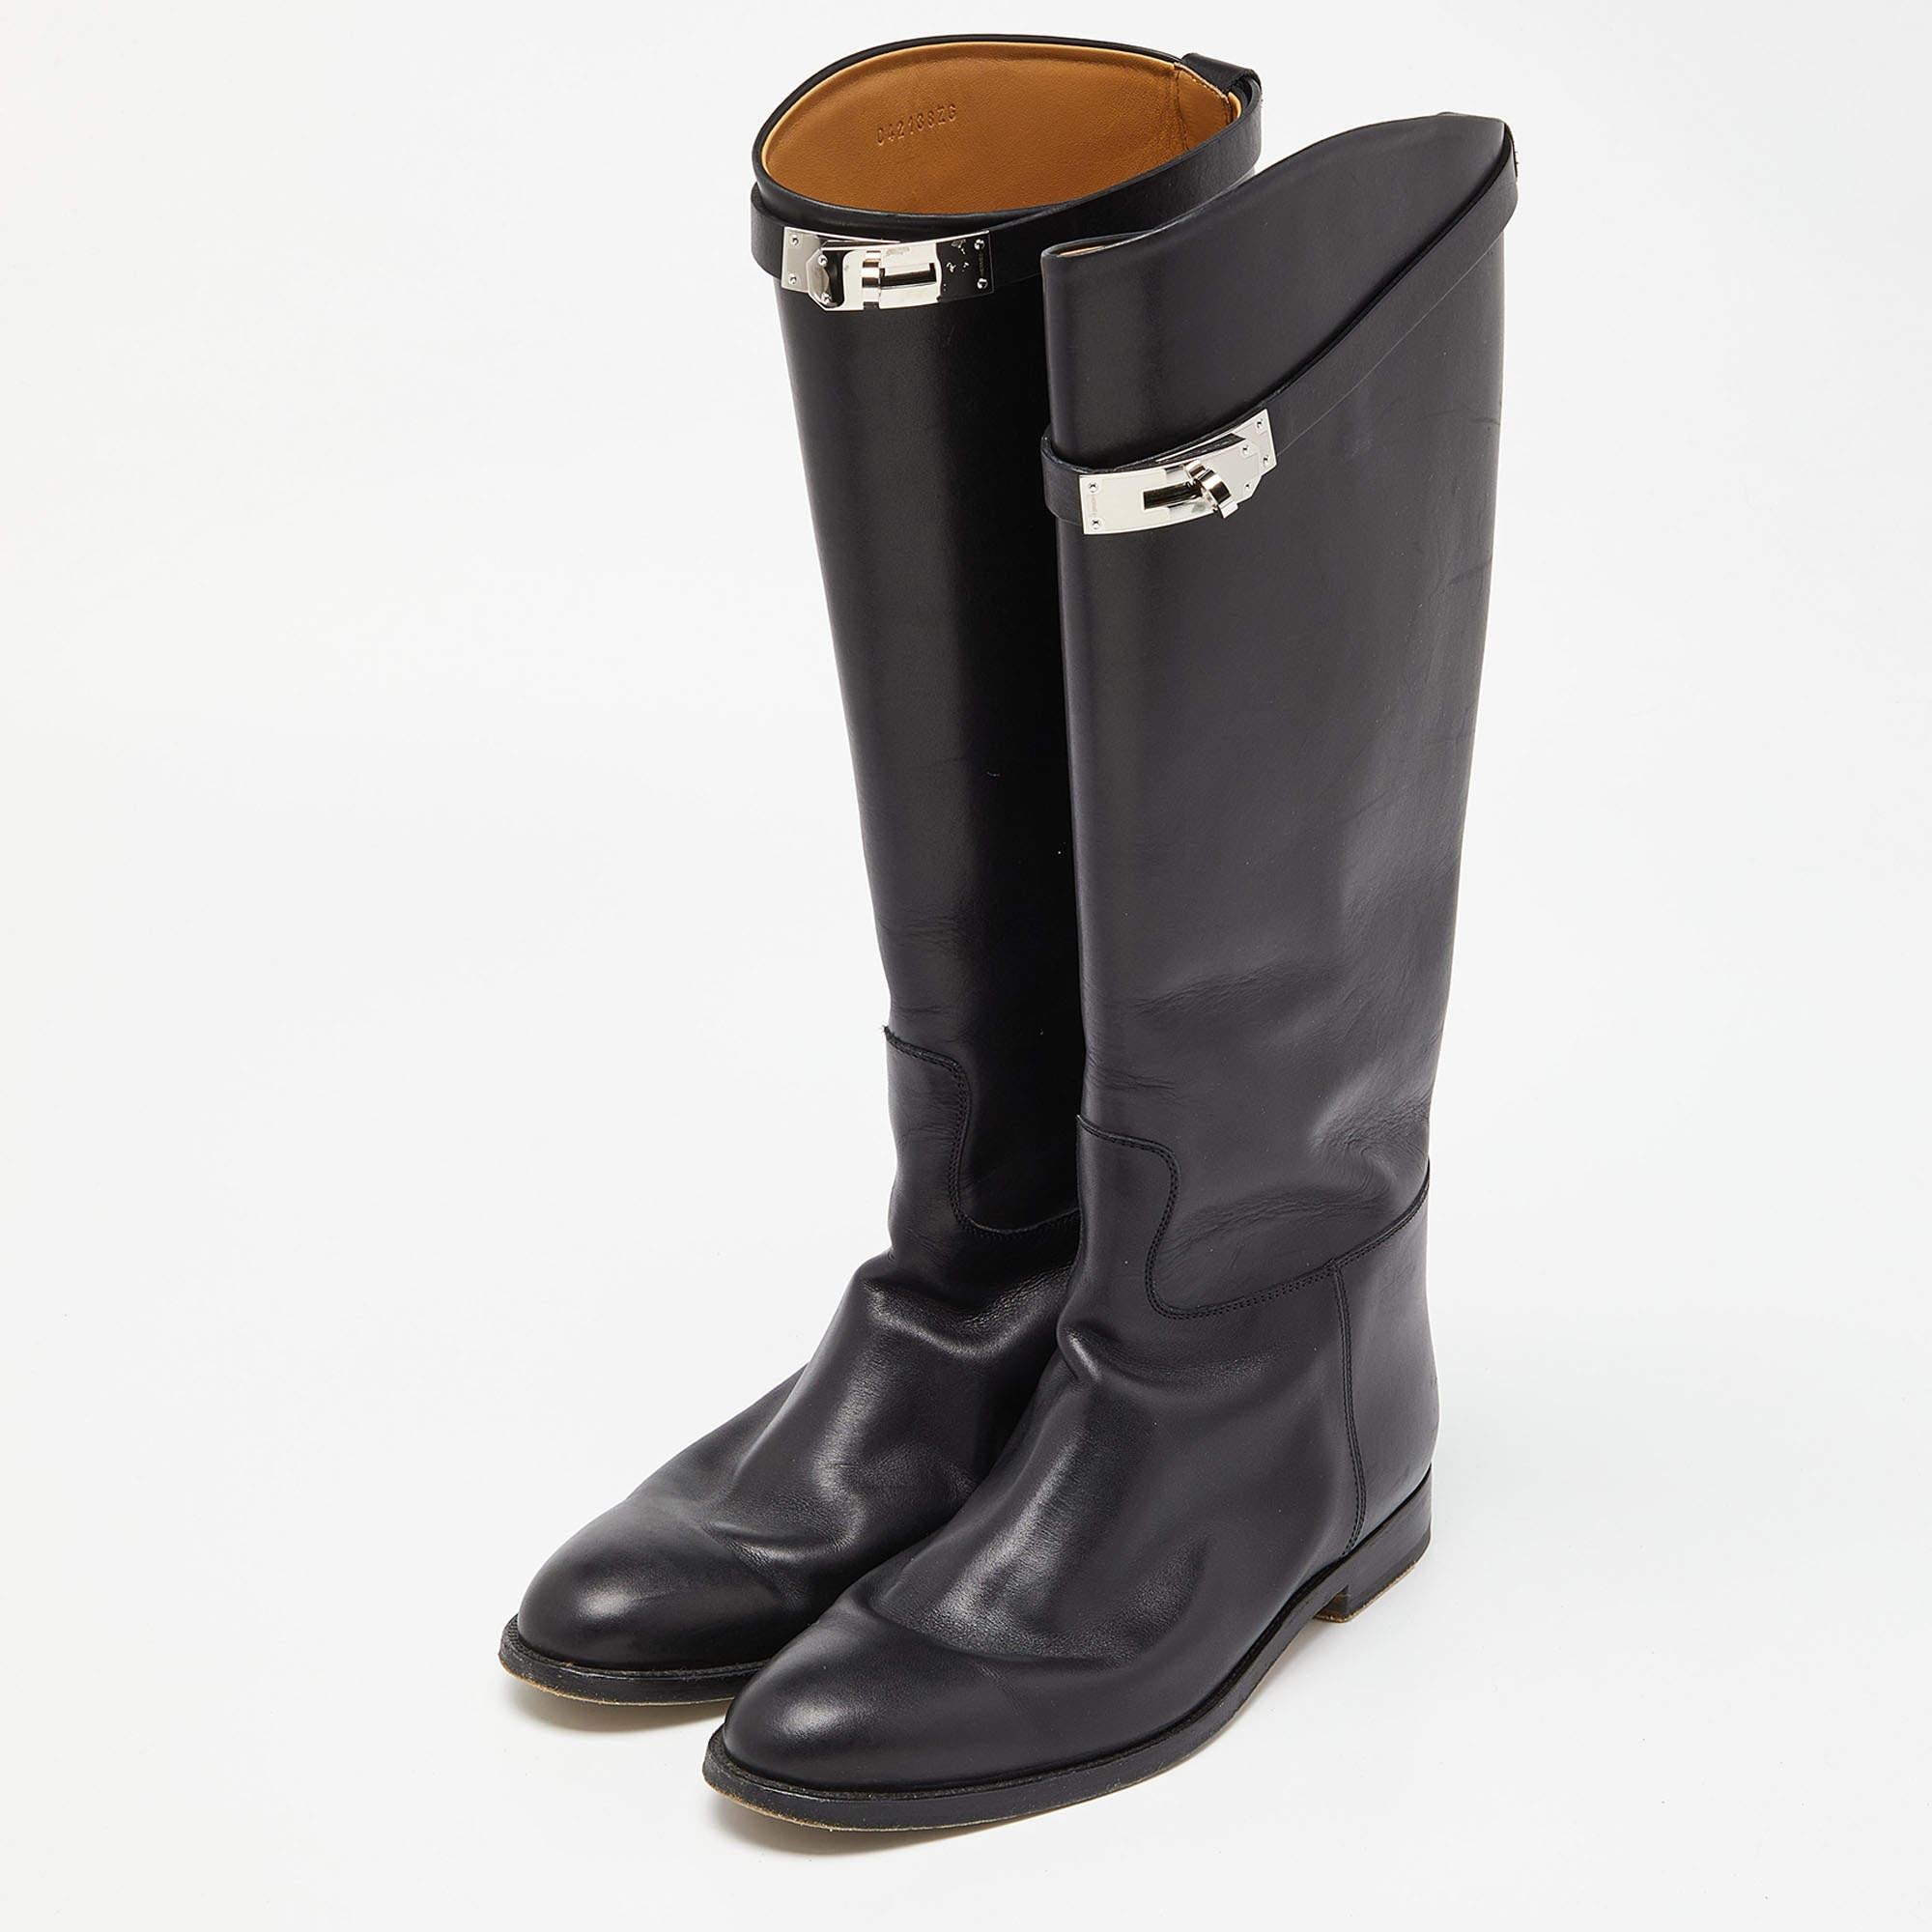  Hermes Black Leather Jumping Boots Size 40 3